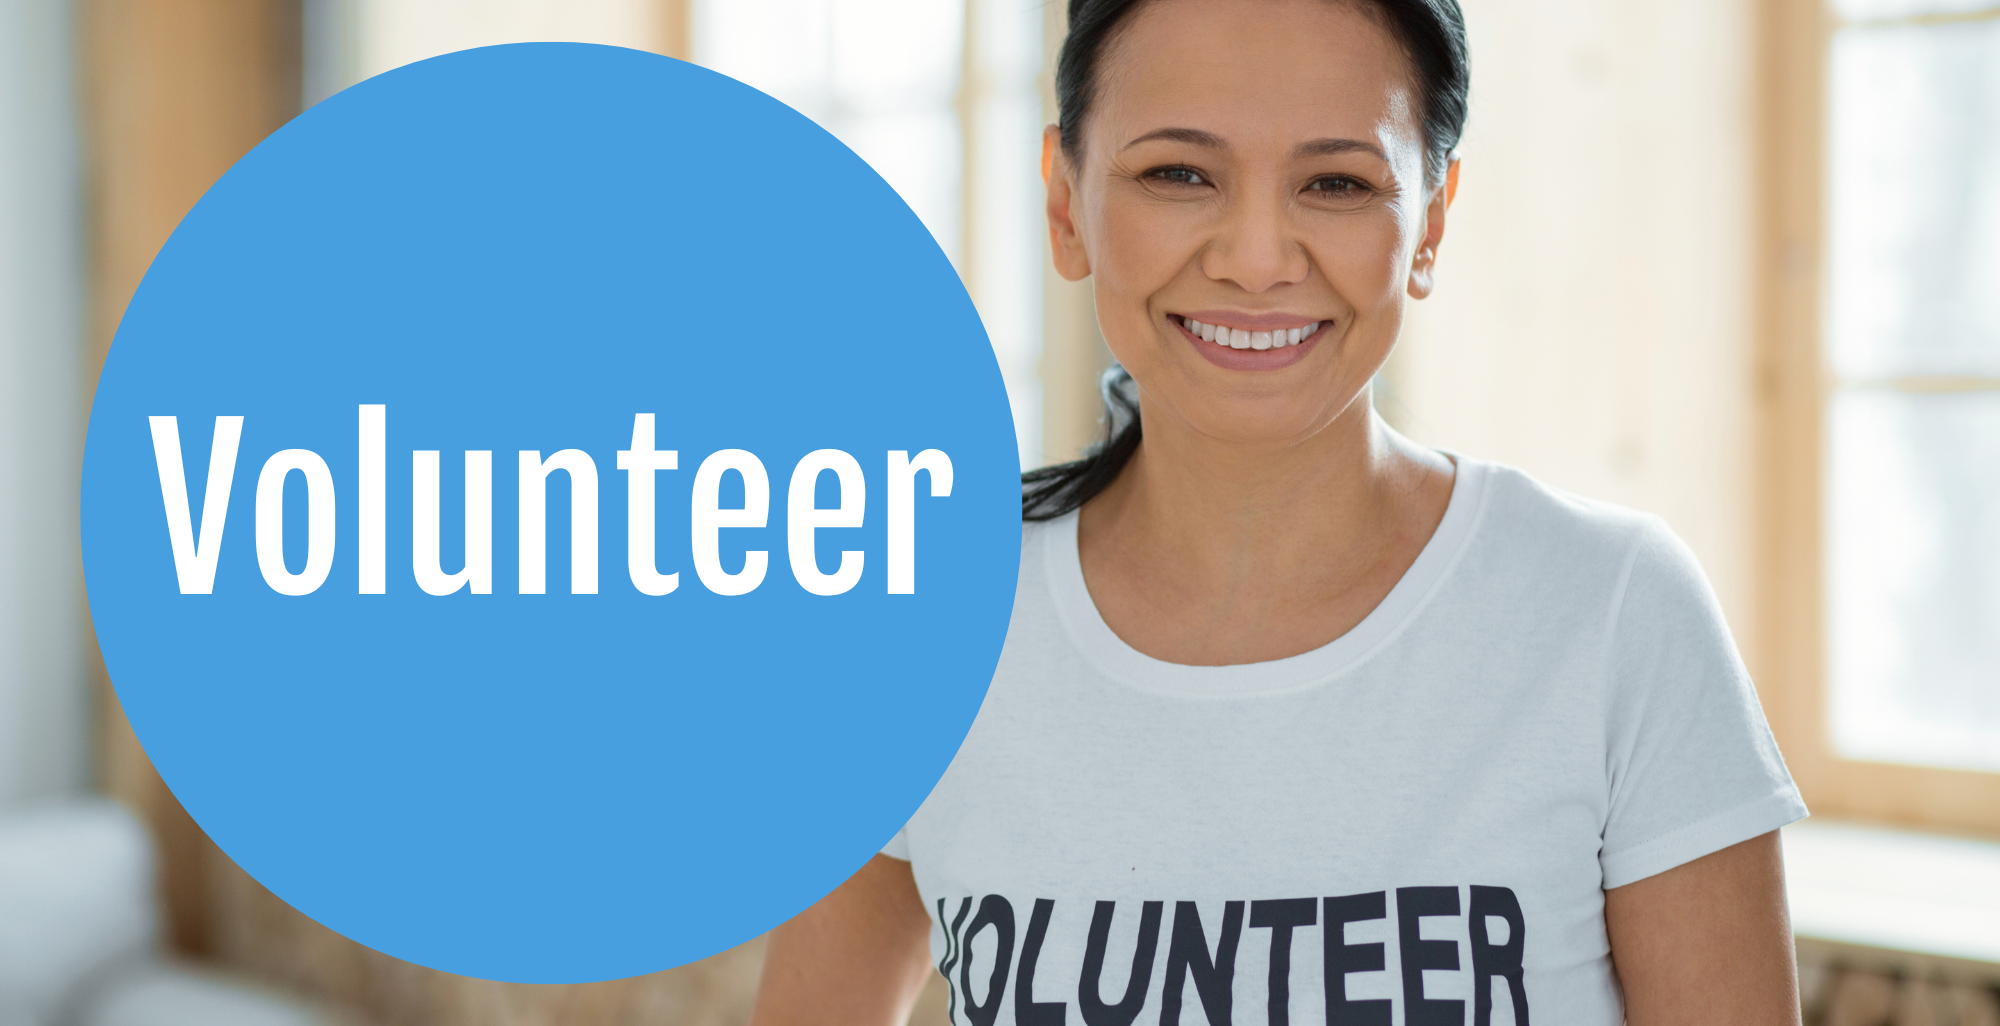 Smiling woman wearing a t-shirt that says "Volunteer"